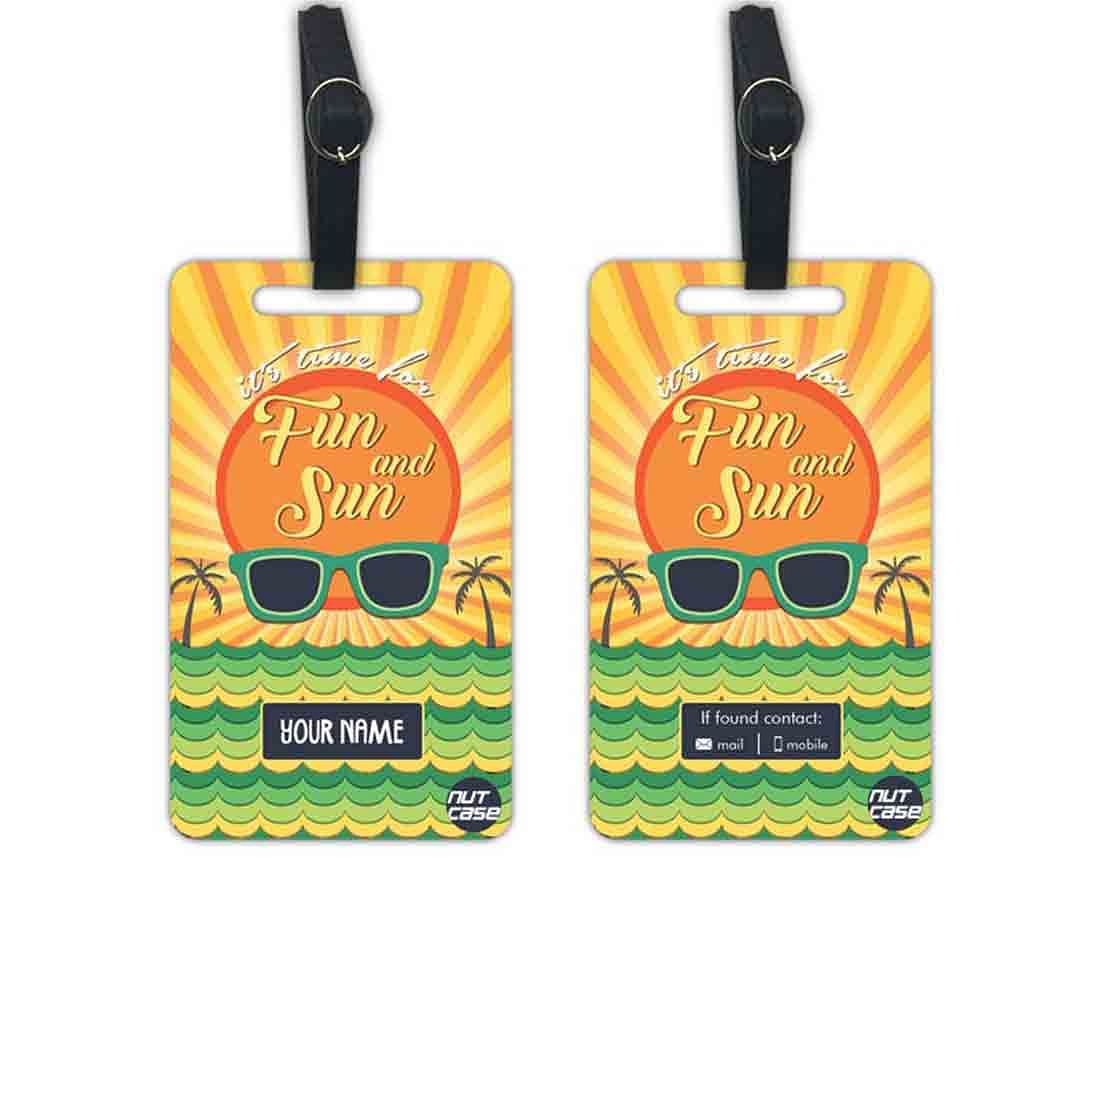 Personalized Name Tags for Bags Set of 2 Ideal for Travel - Fun & Sun